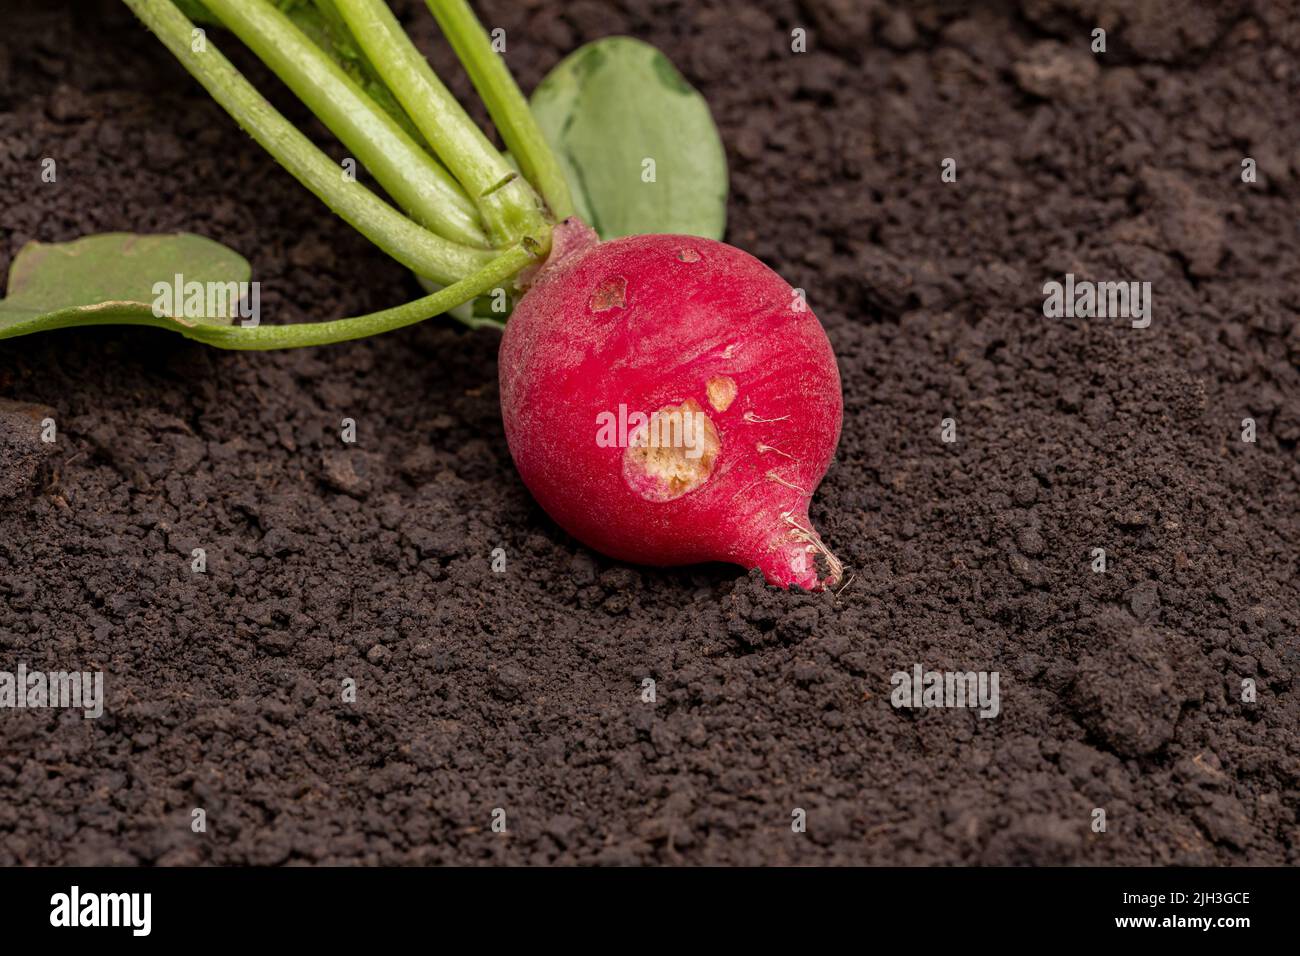 Red radish with bug hole in root. Imperfect food, garden insect damage and organic produce concept Stock Photo